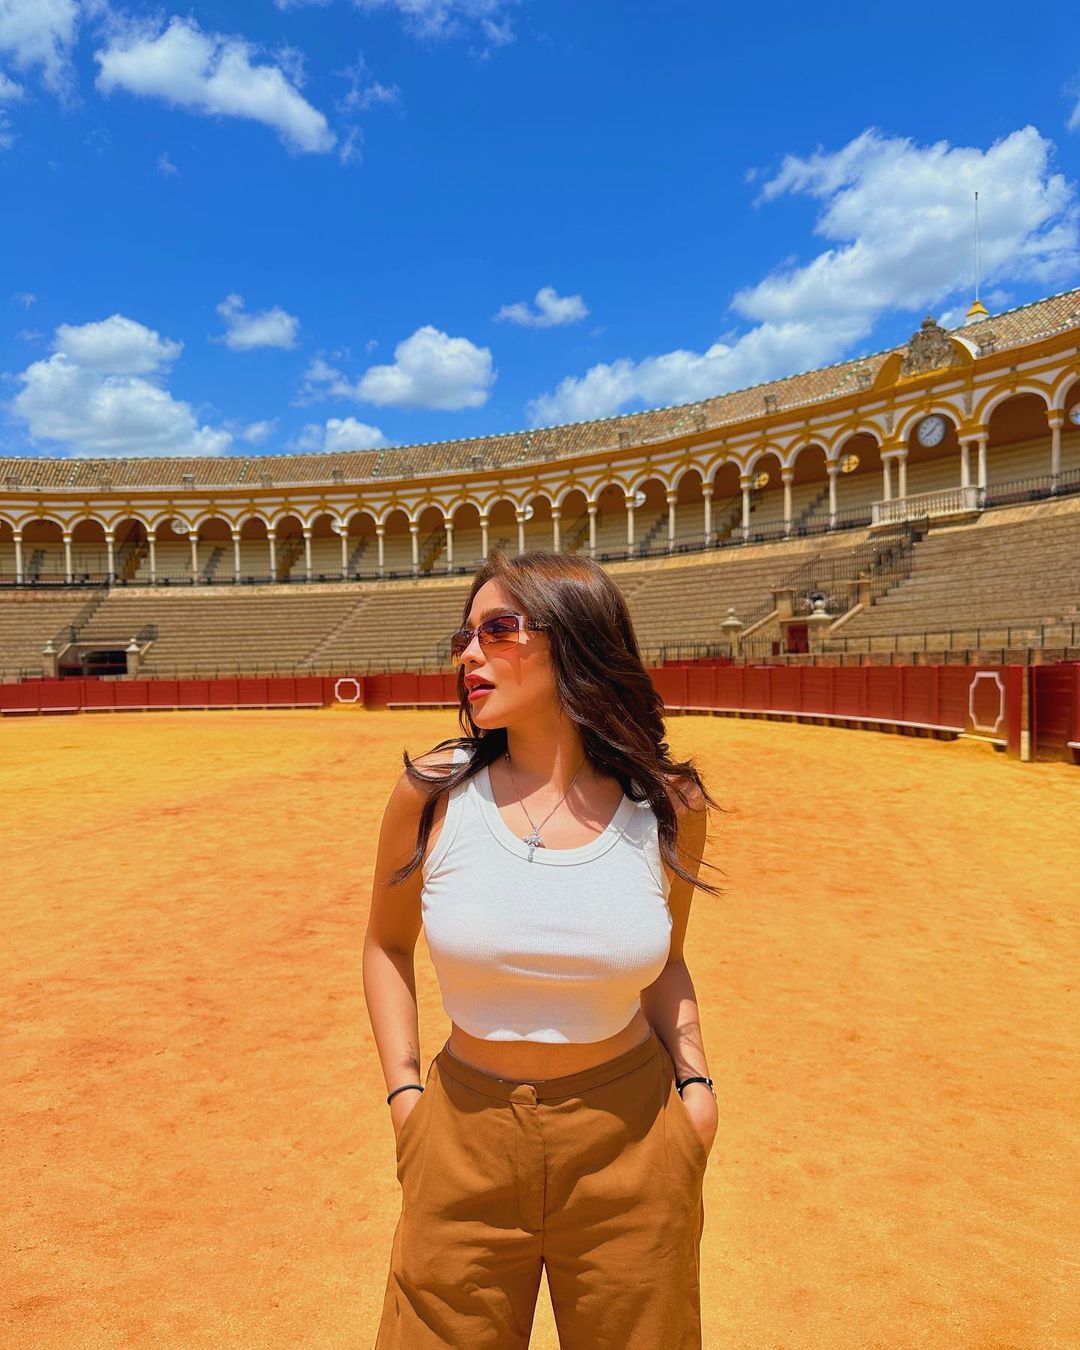 andrea brillantes spain travel outfit